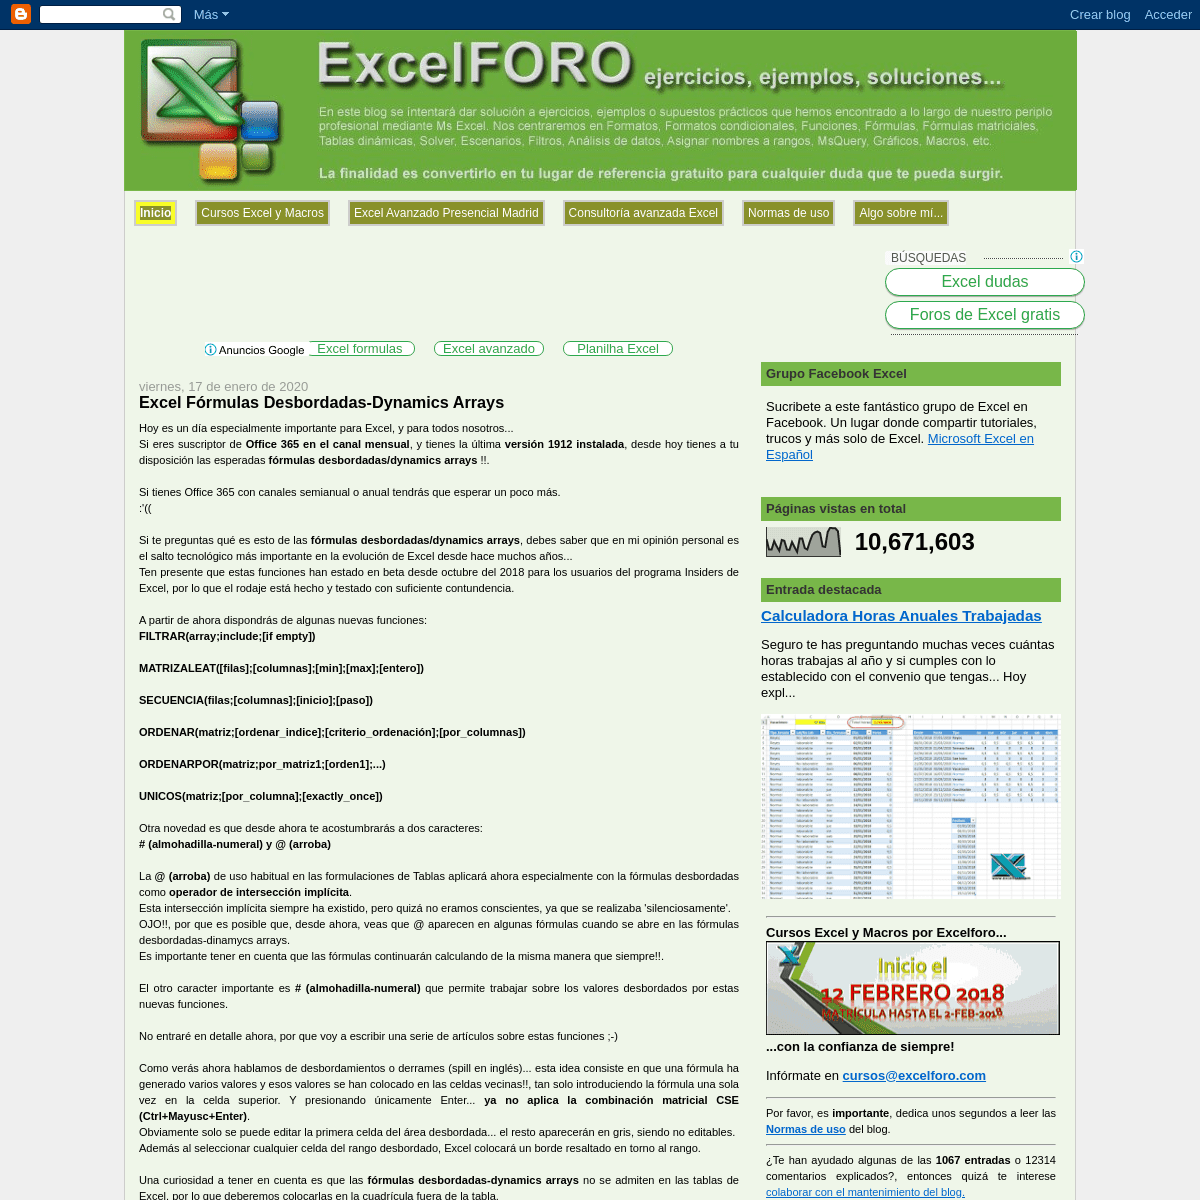 A complete backup of excelforo.blogspot.com